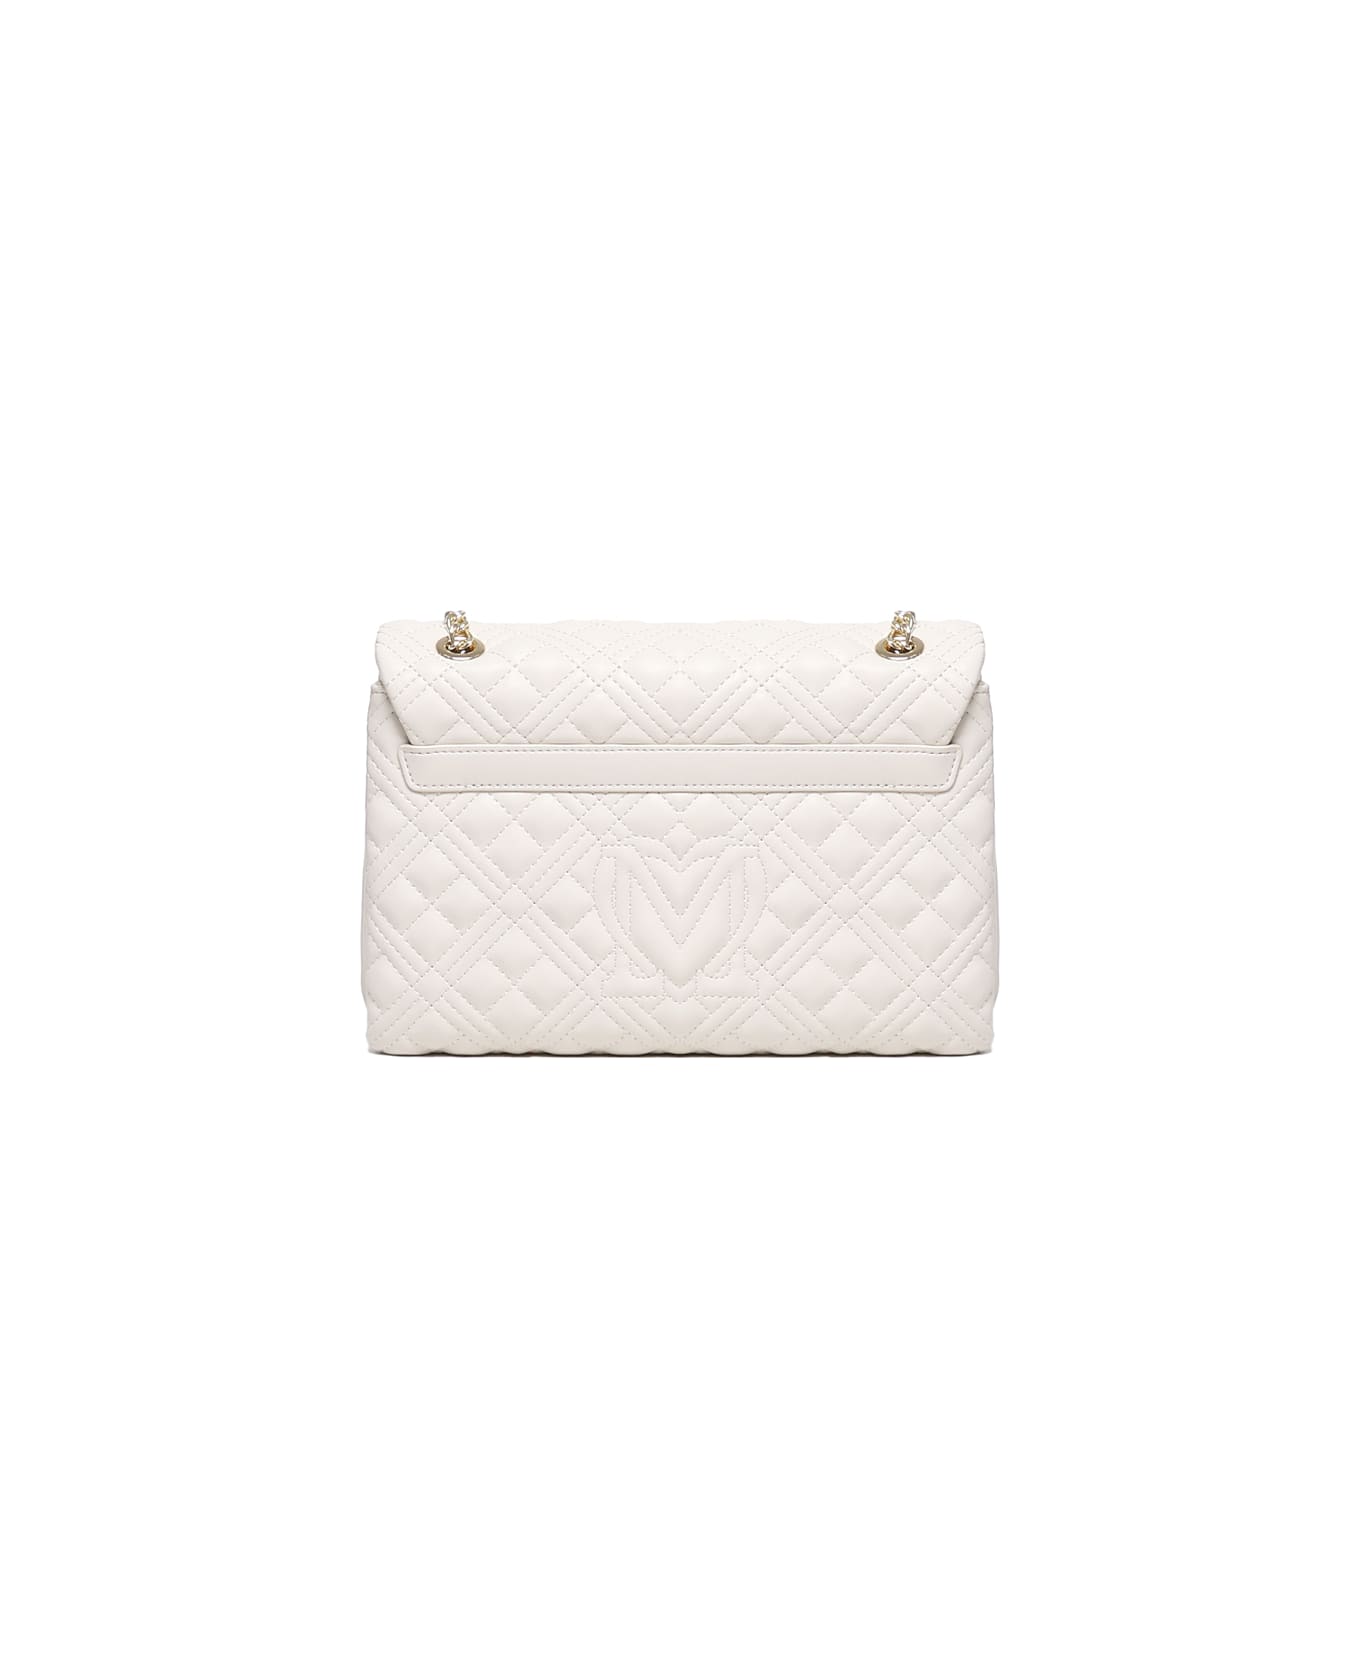 Love Moschino Quilted Bag With Logo Plaque - Ivory